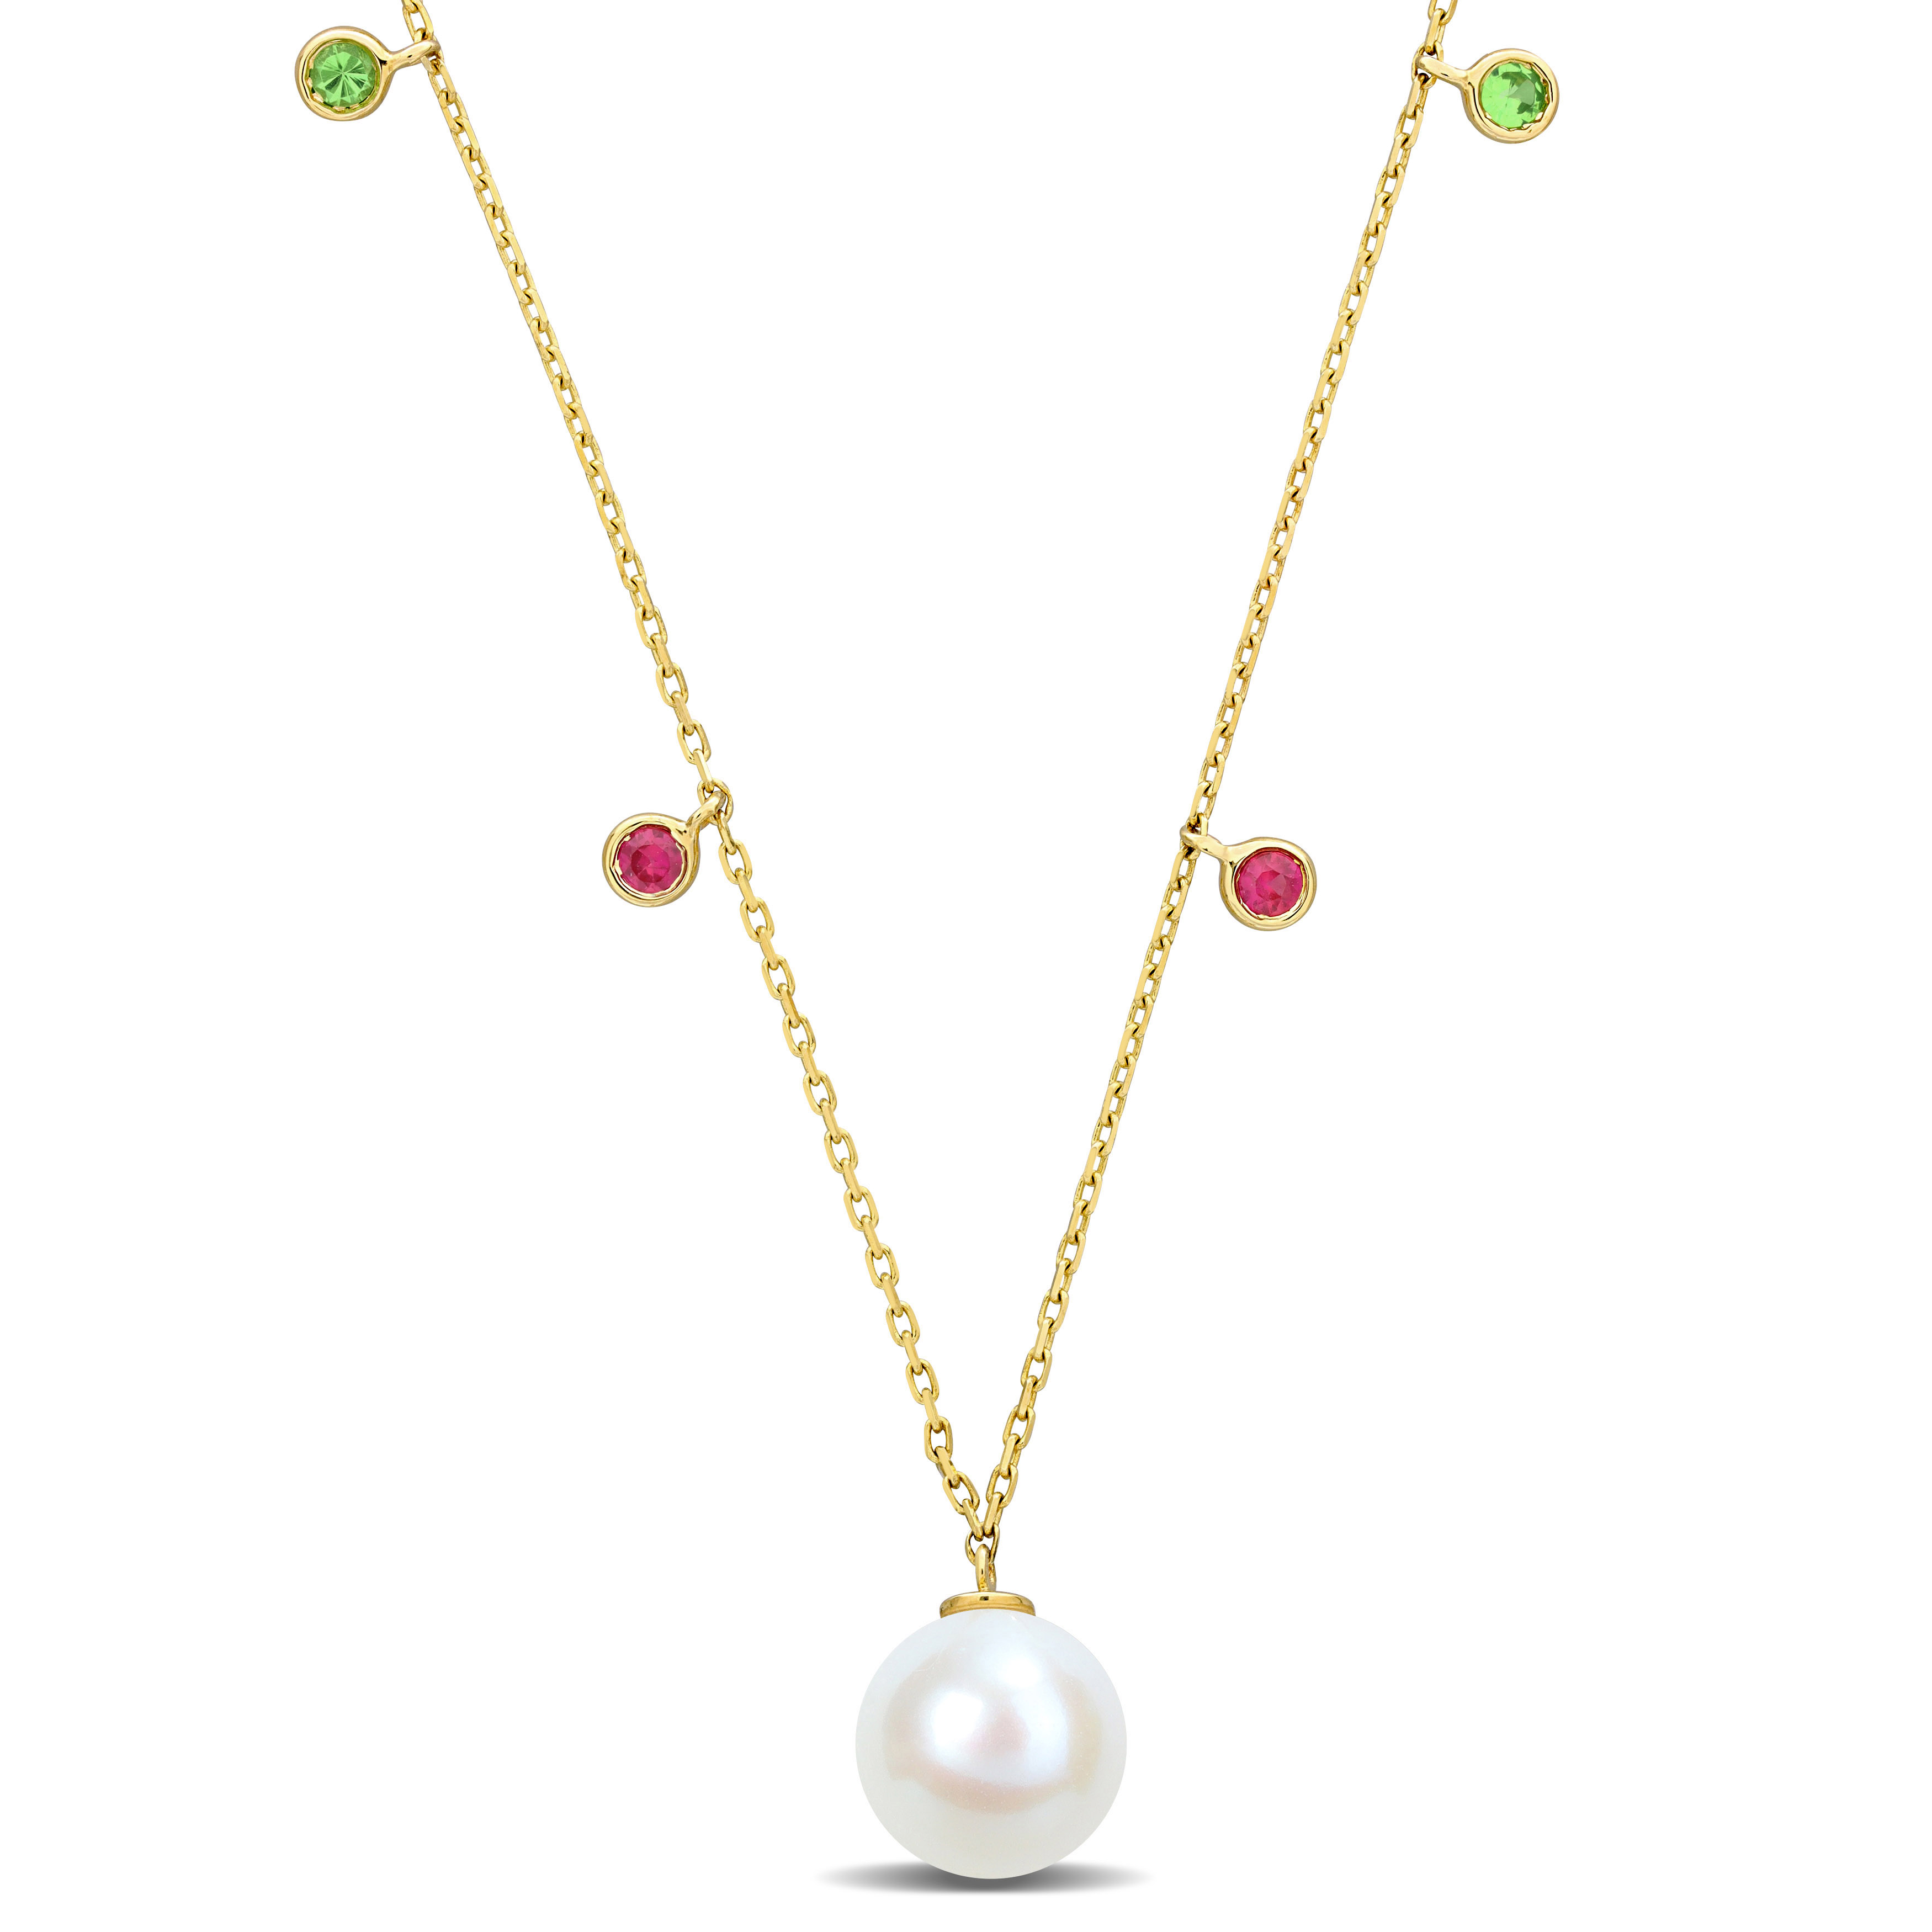 8-8.5 MM Freshwater Cultured Pearl 1/5ct TGW Tsavorite & Pink Sapphire Drop Station Necklace in 10k Yellow Gold